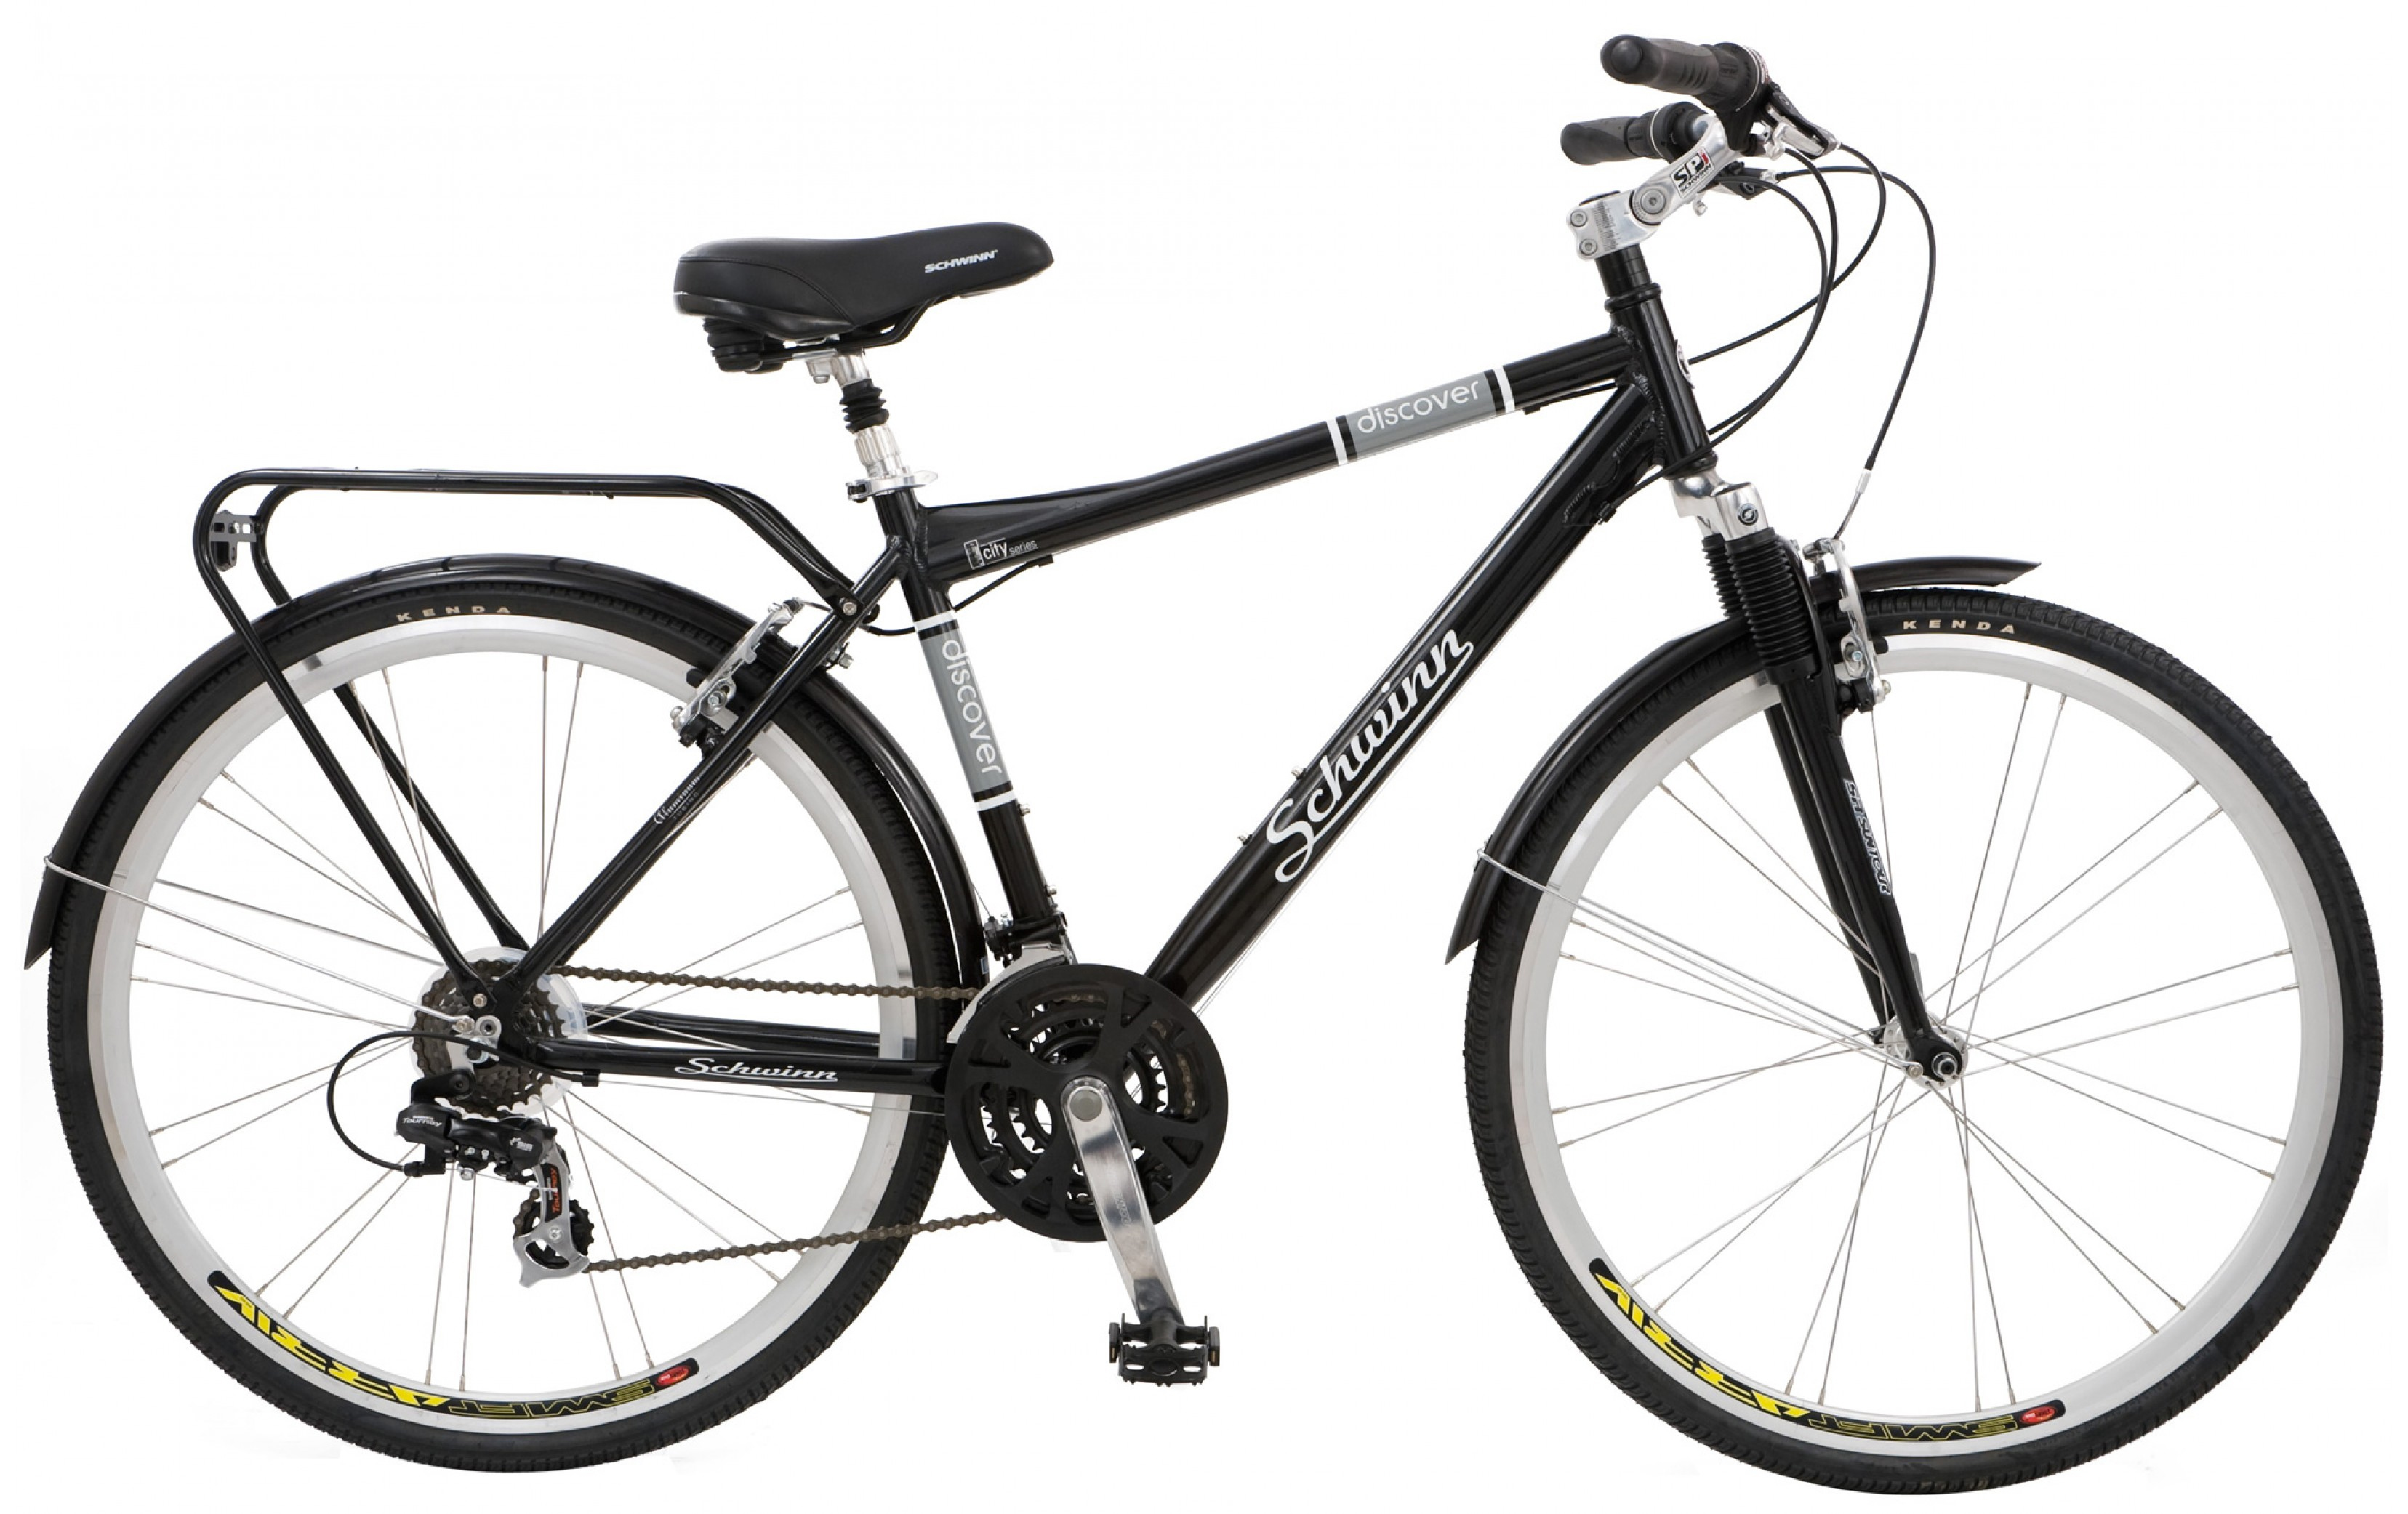 Schwinn Discover 700c Hybrid Bicycle with Full Fenders and Rear Cargo Rack - image 2 of 2